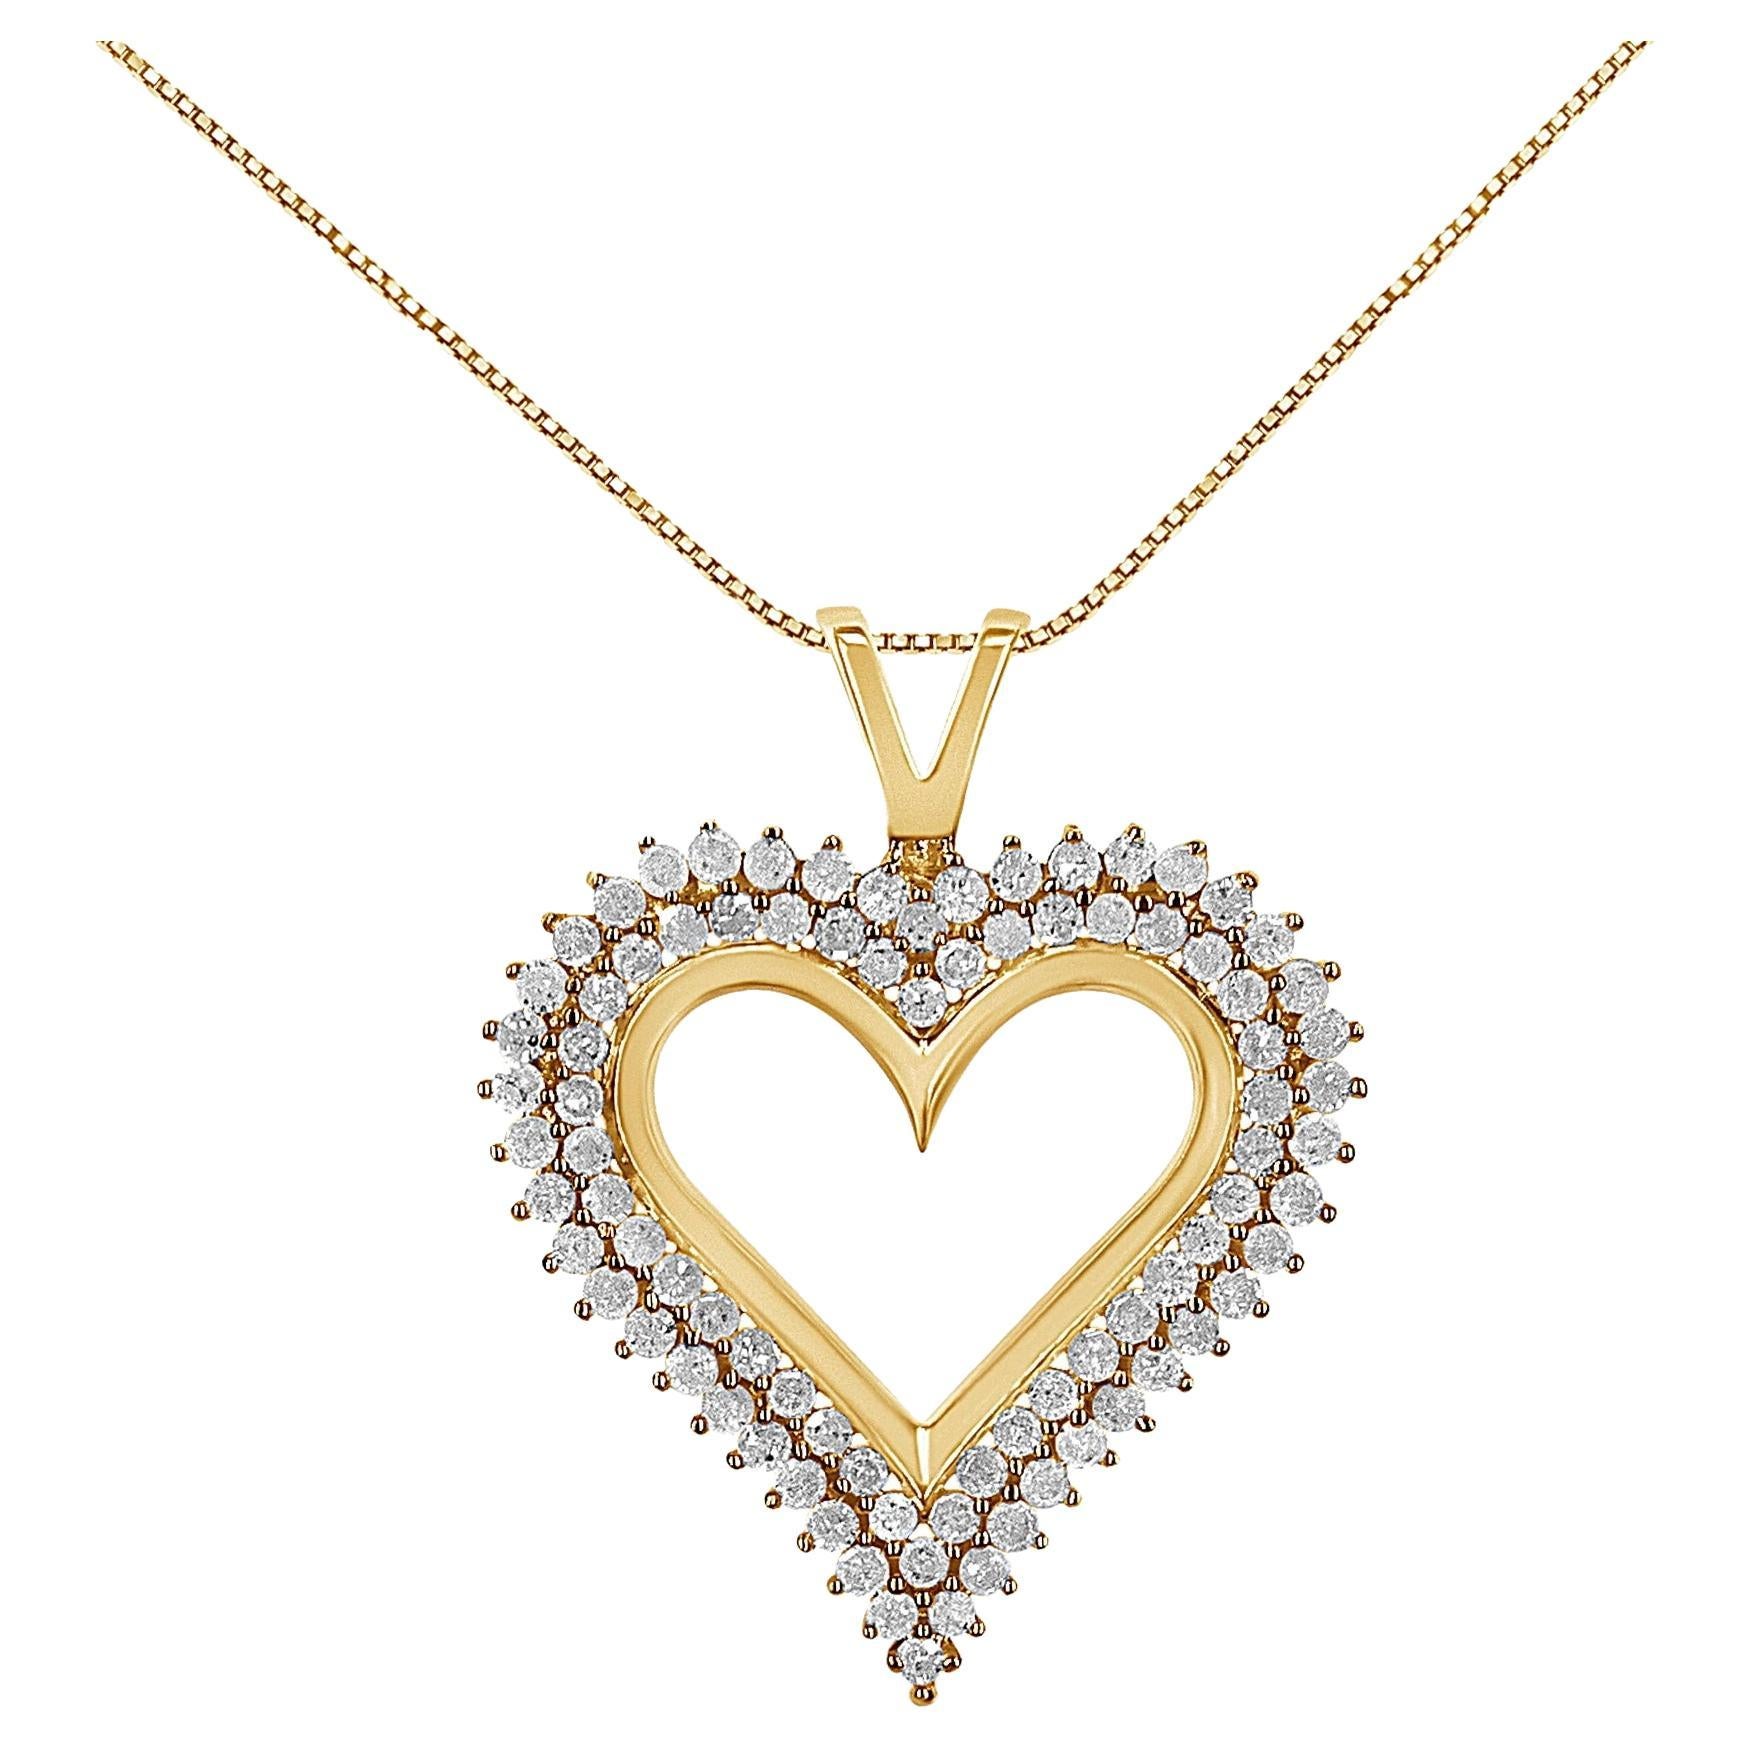 10K Yellow Gold Plated Sterling Silver 3.0 Carat Diamond Heart Pendant Necklace